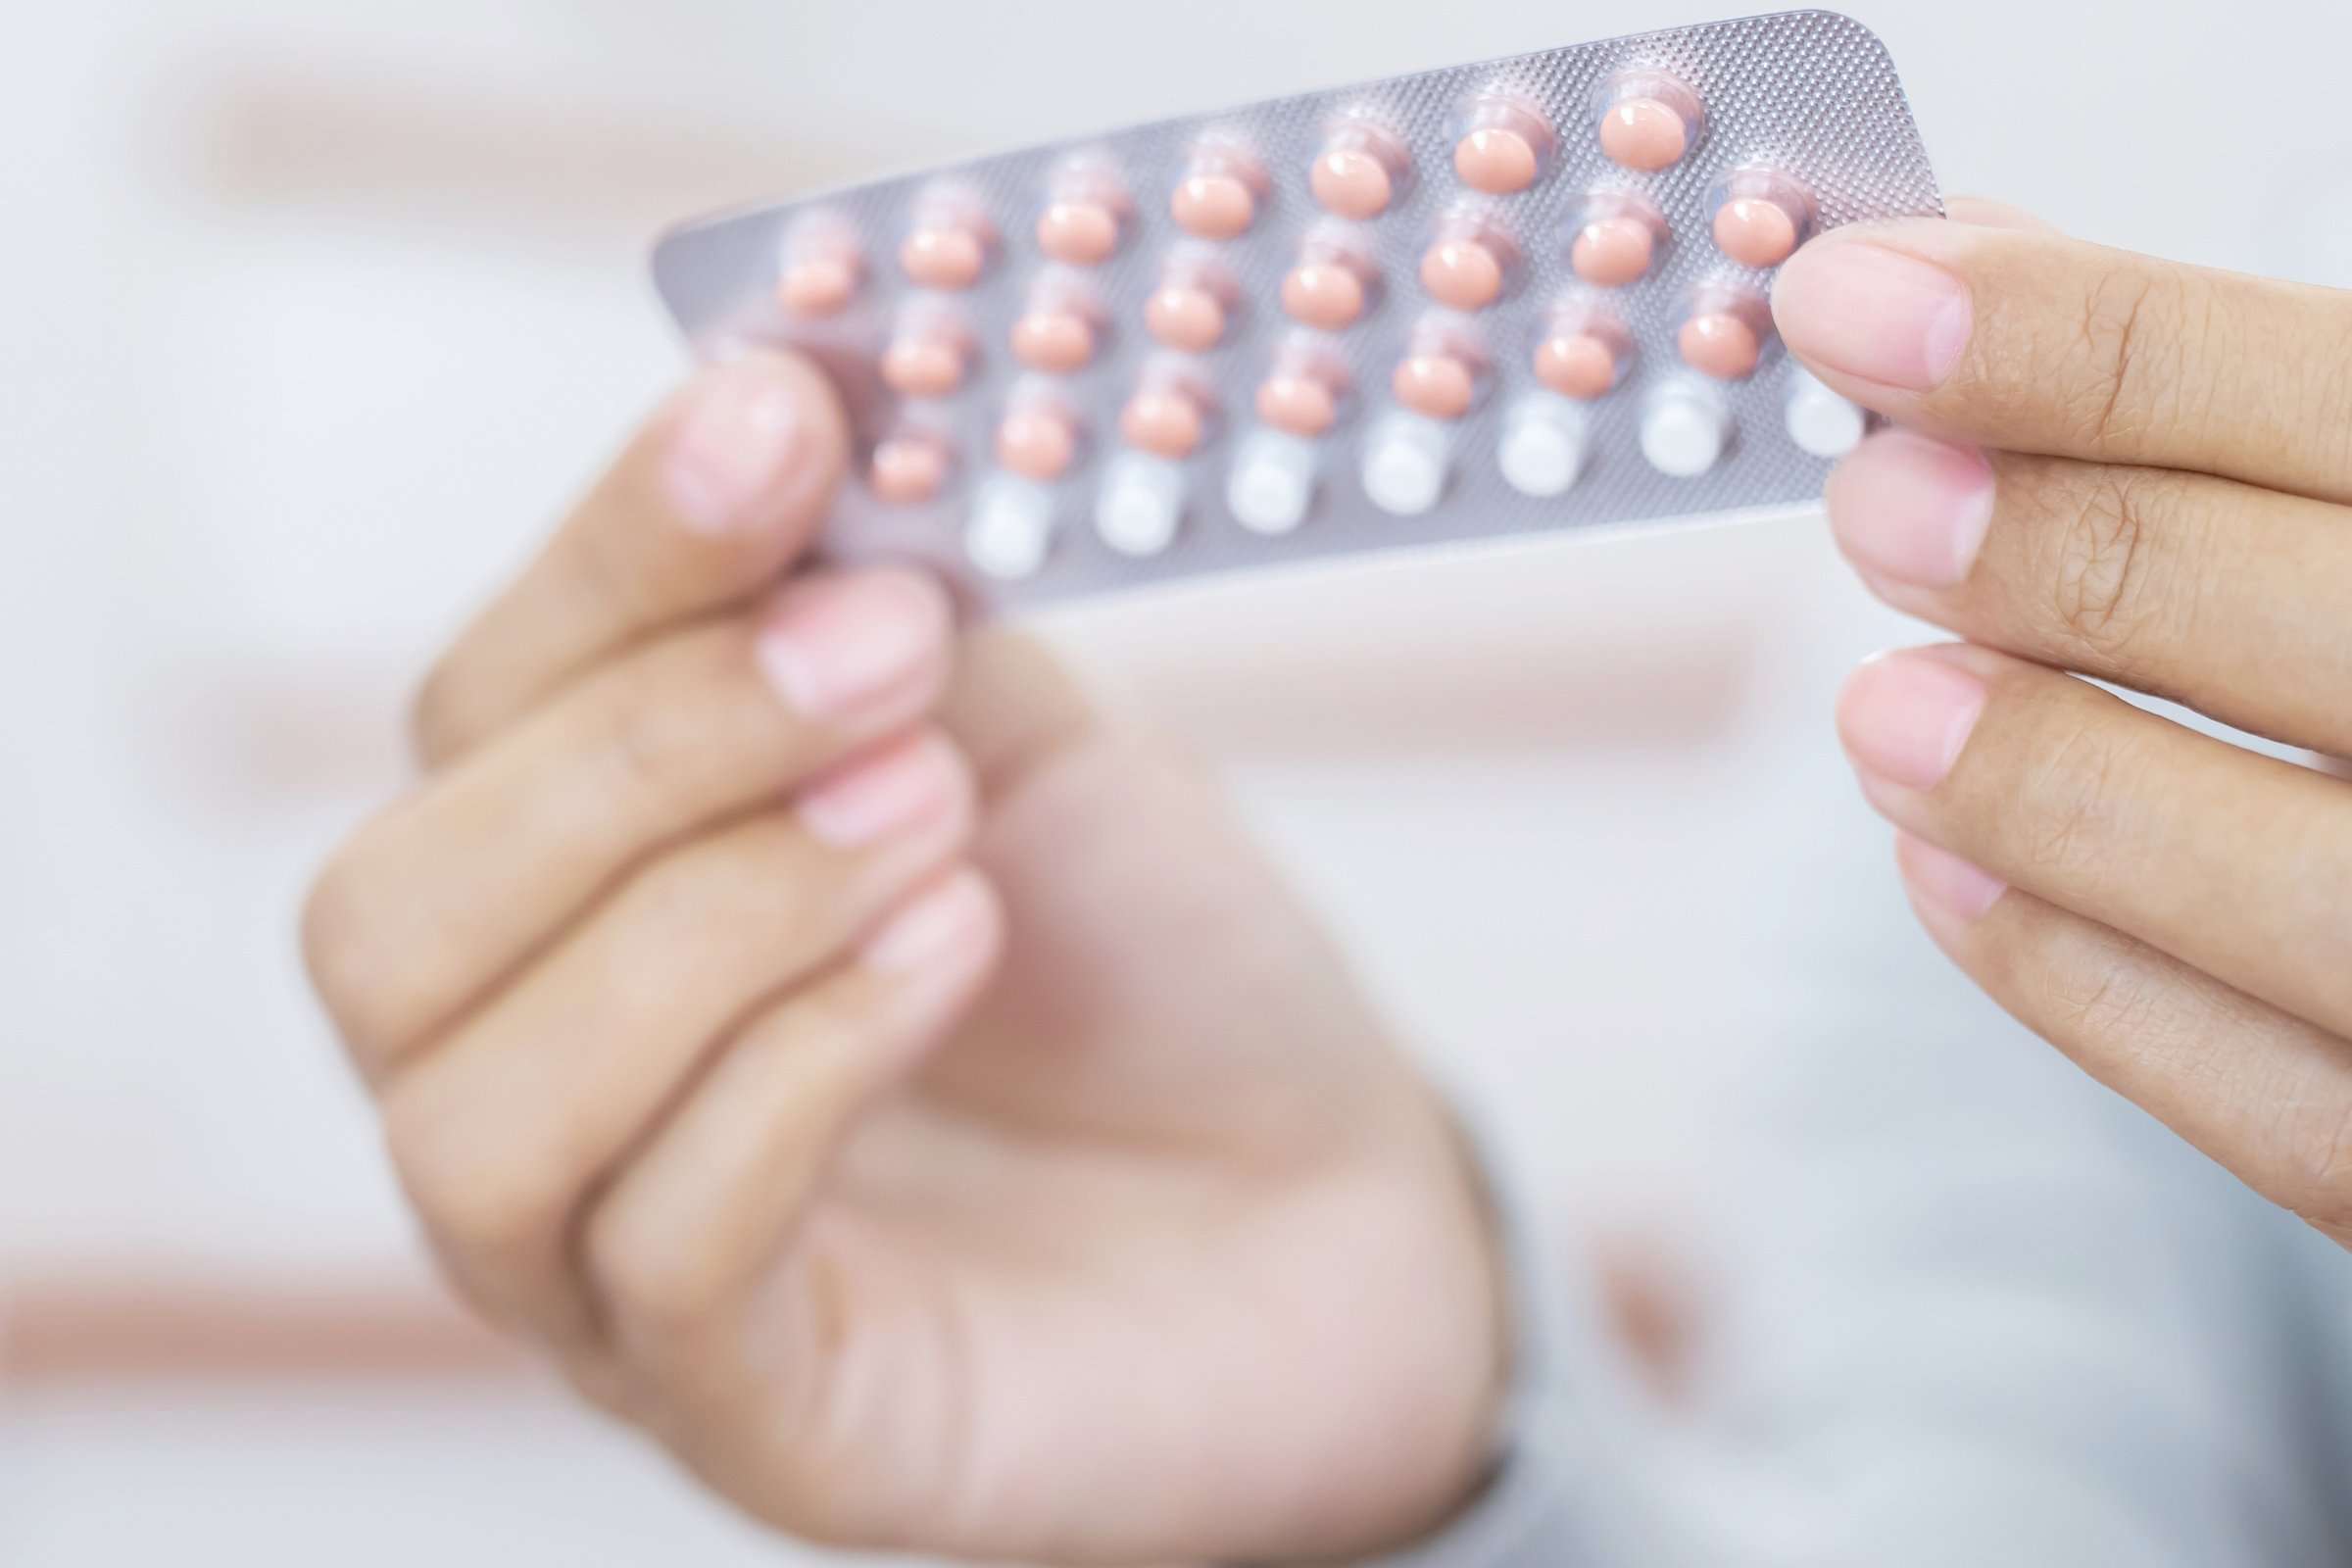 How Does Hormonal Birth Control Affect Your Health?